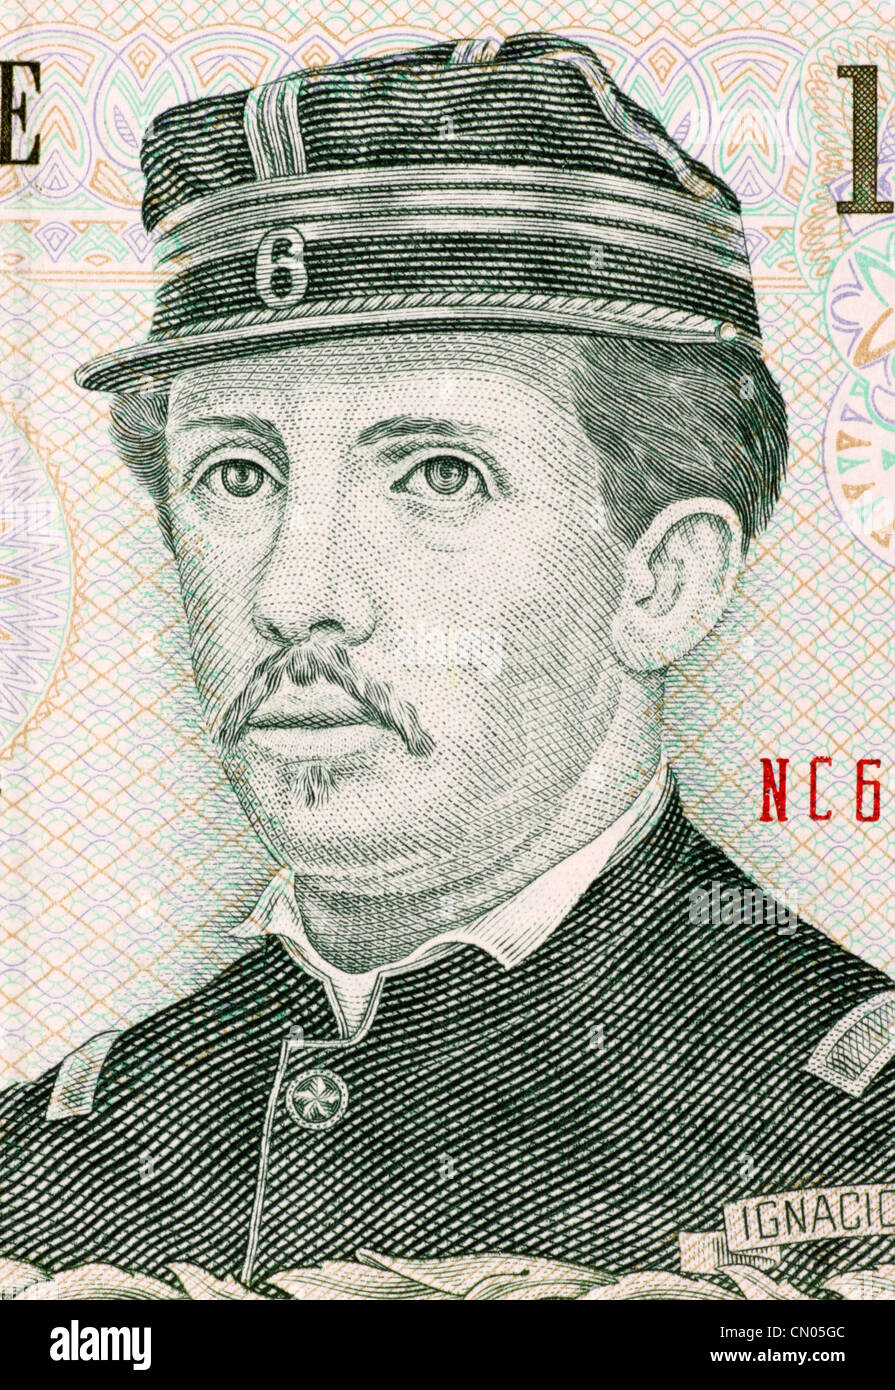 Ignacio Carrera Pinto (1848-1882) on 1000 Pesos 2007 Banknote from Chile.  Chilean hero of the War of the Pacific Stock Photo - Alamy